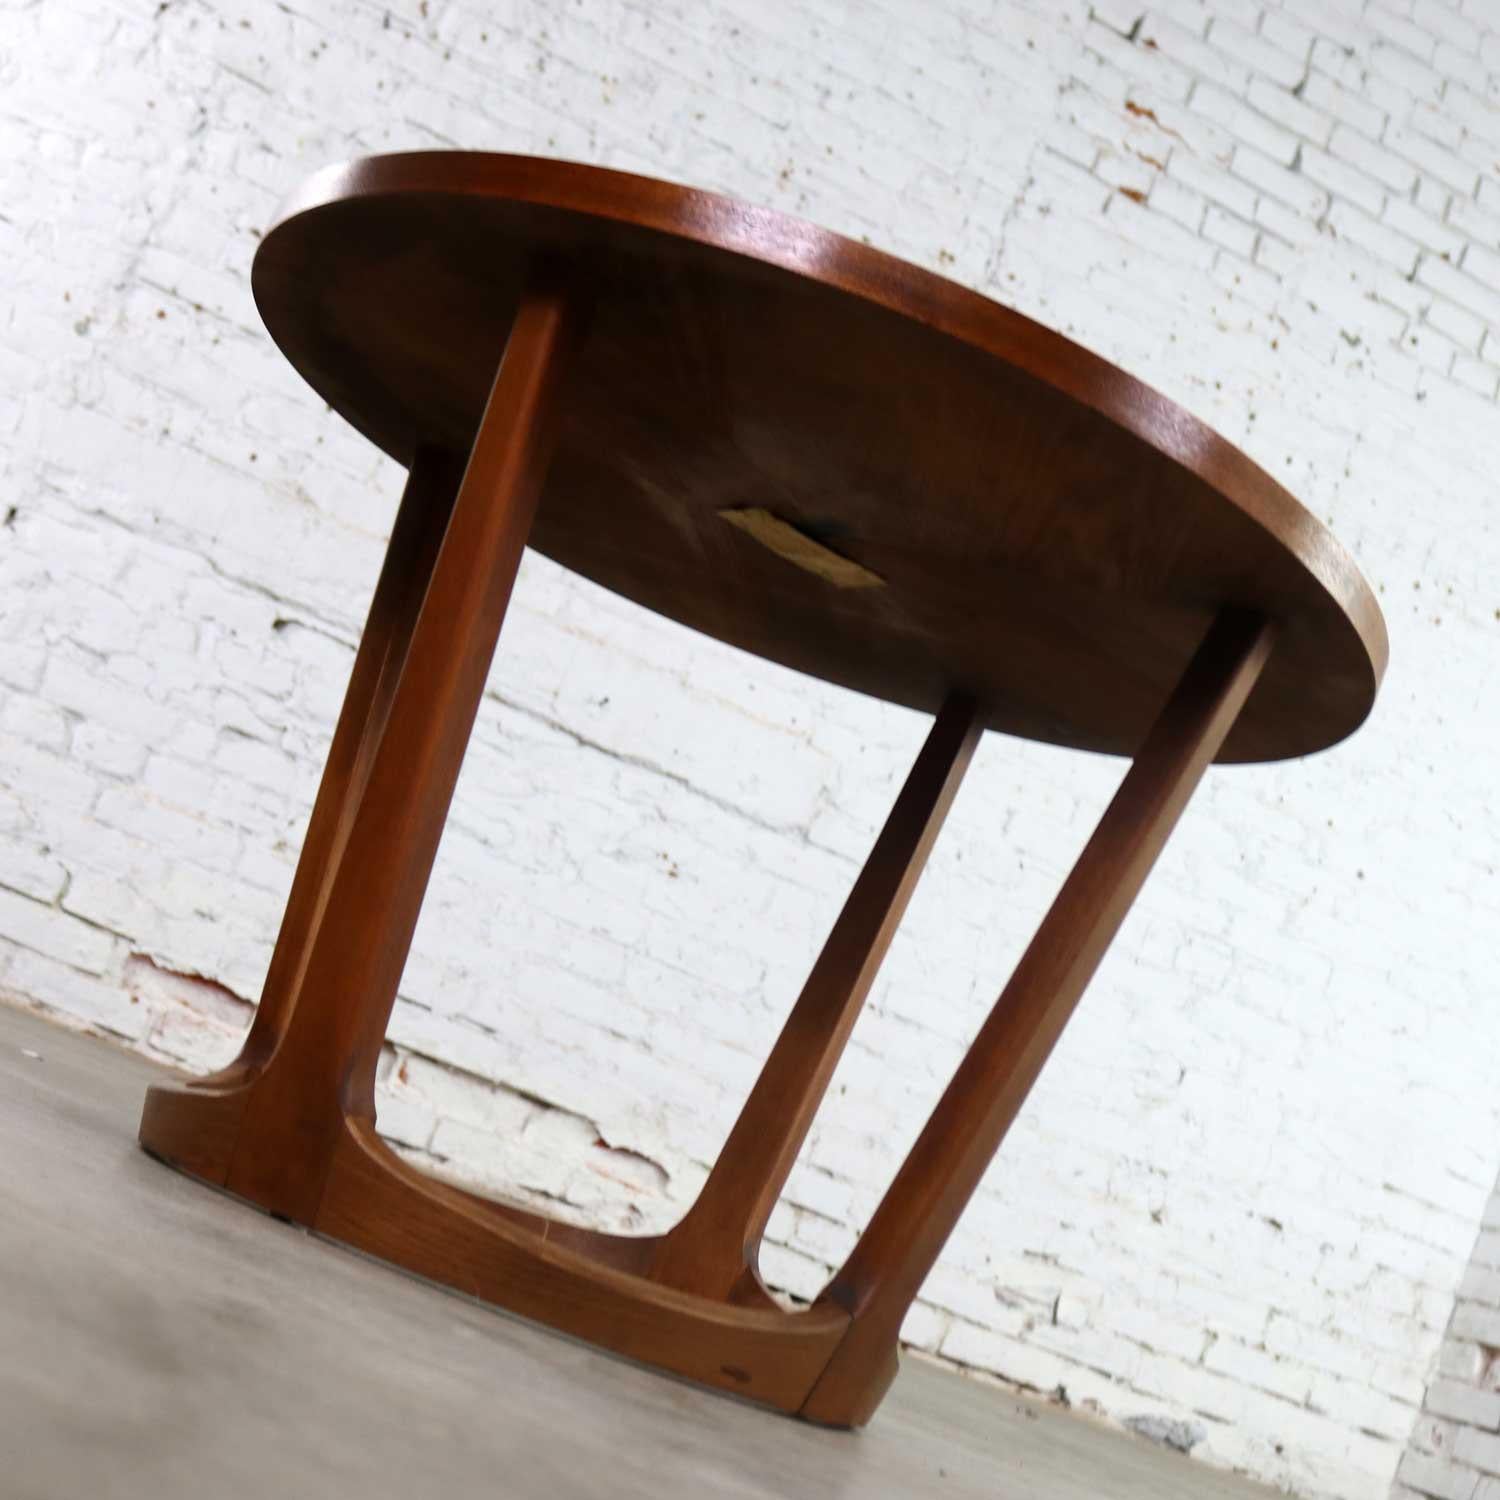 20th Century Mid-Century Modern Lane Round Drum End Table 997-22 from the Rhythm Collection